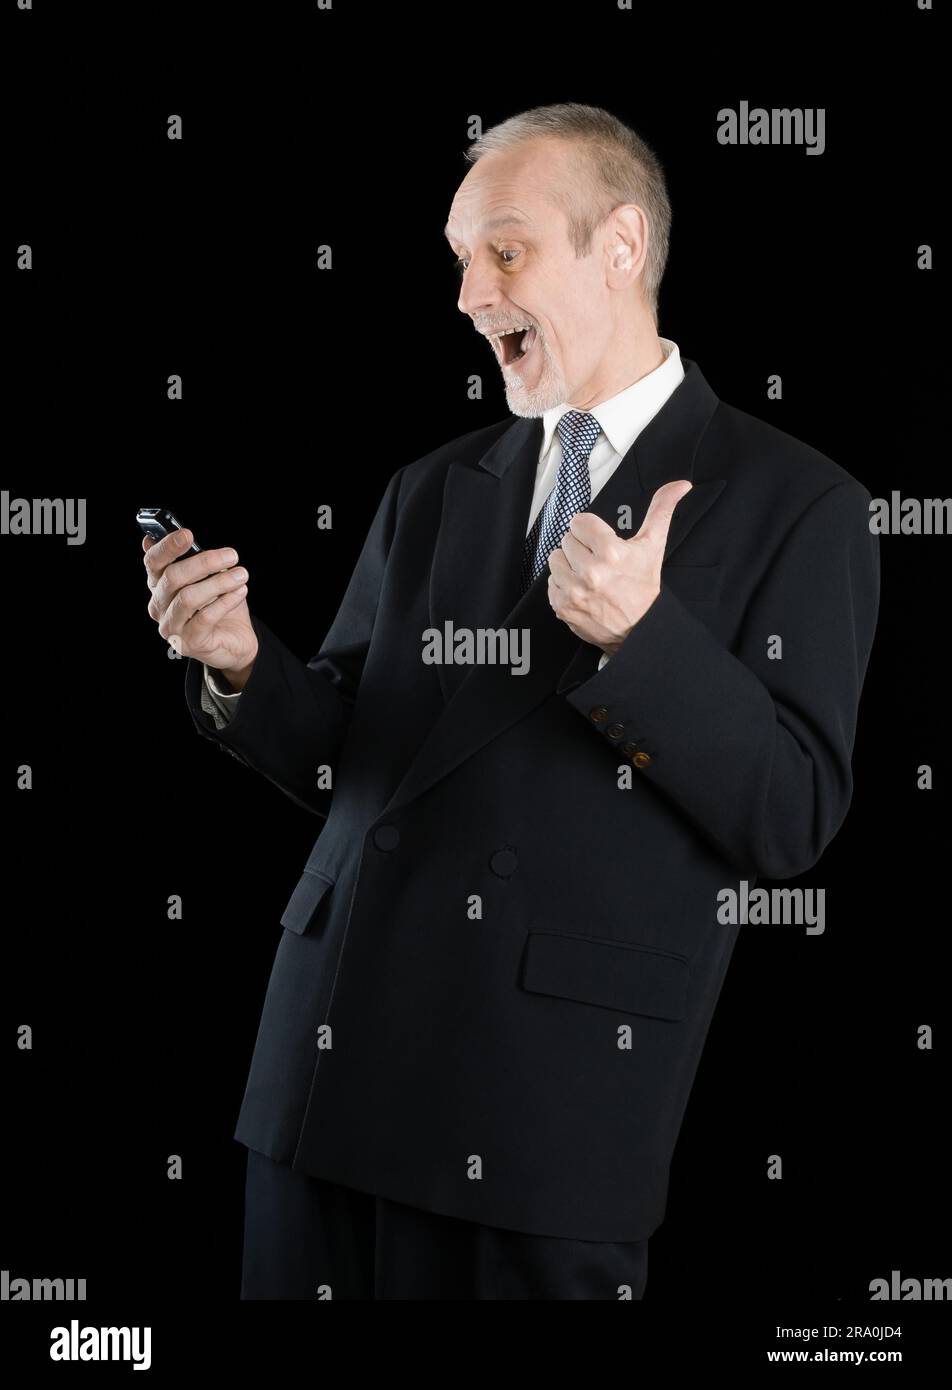 Happy businessman wearing a black suit, smiling and reading sms on mobile phone, with thumb up, on black background Stock Photo